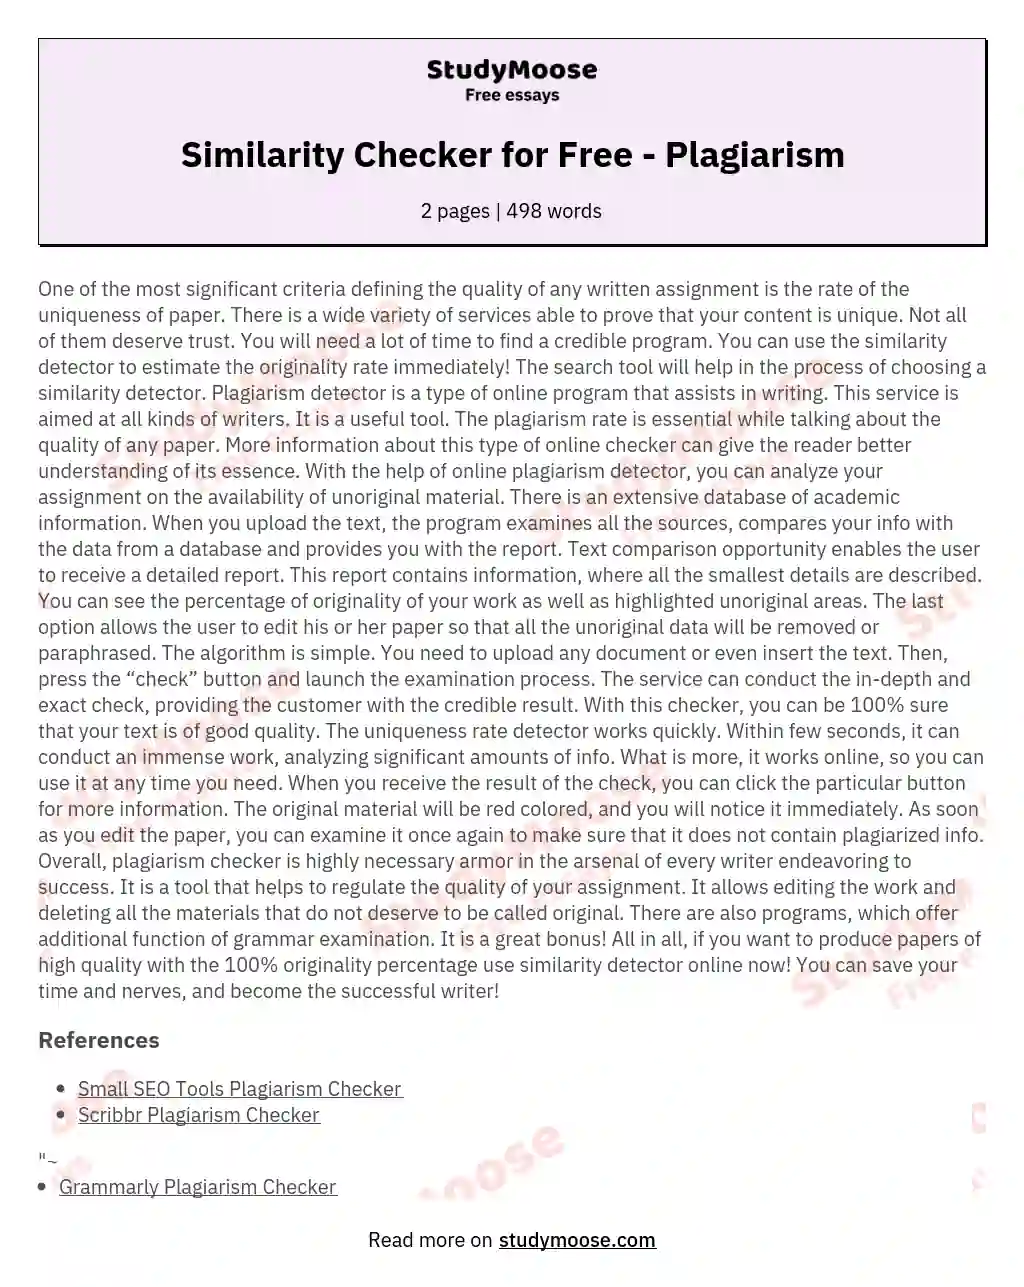 Similarity Checker for Free - Plagiarism essay